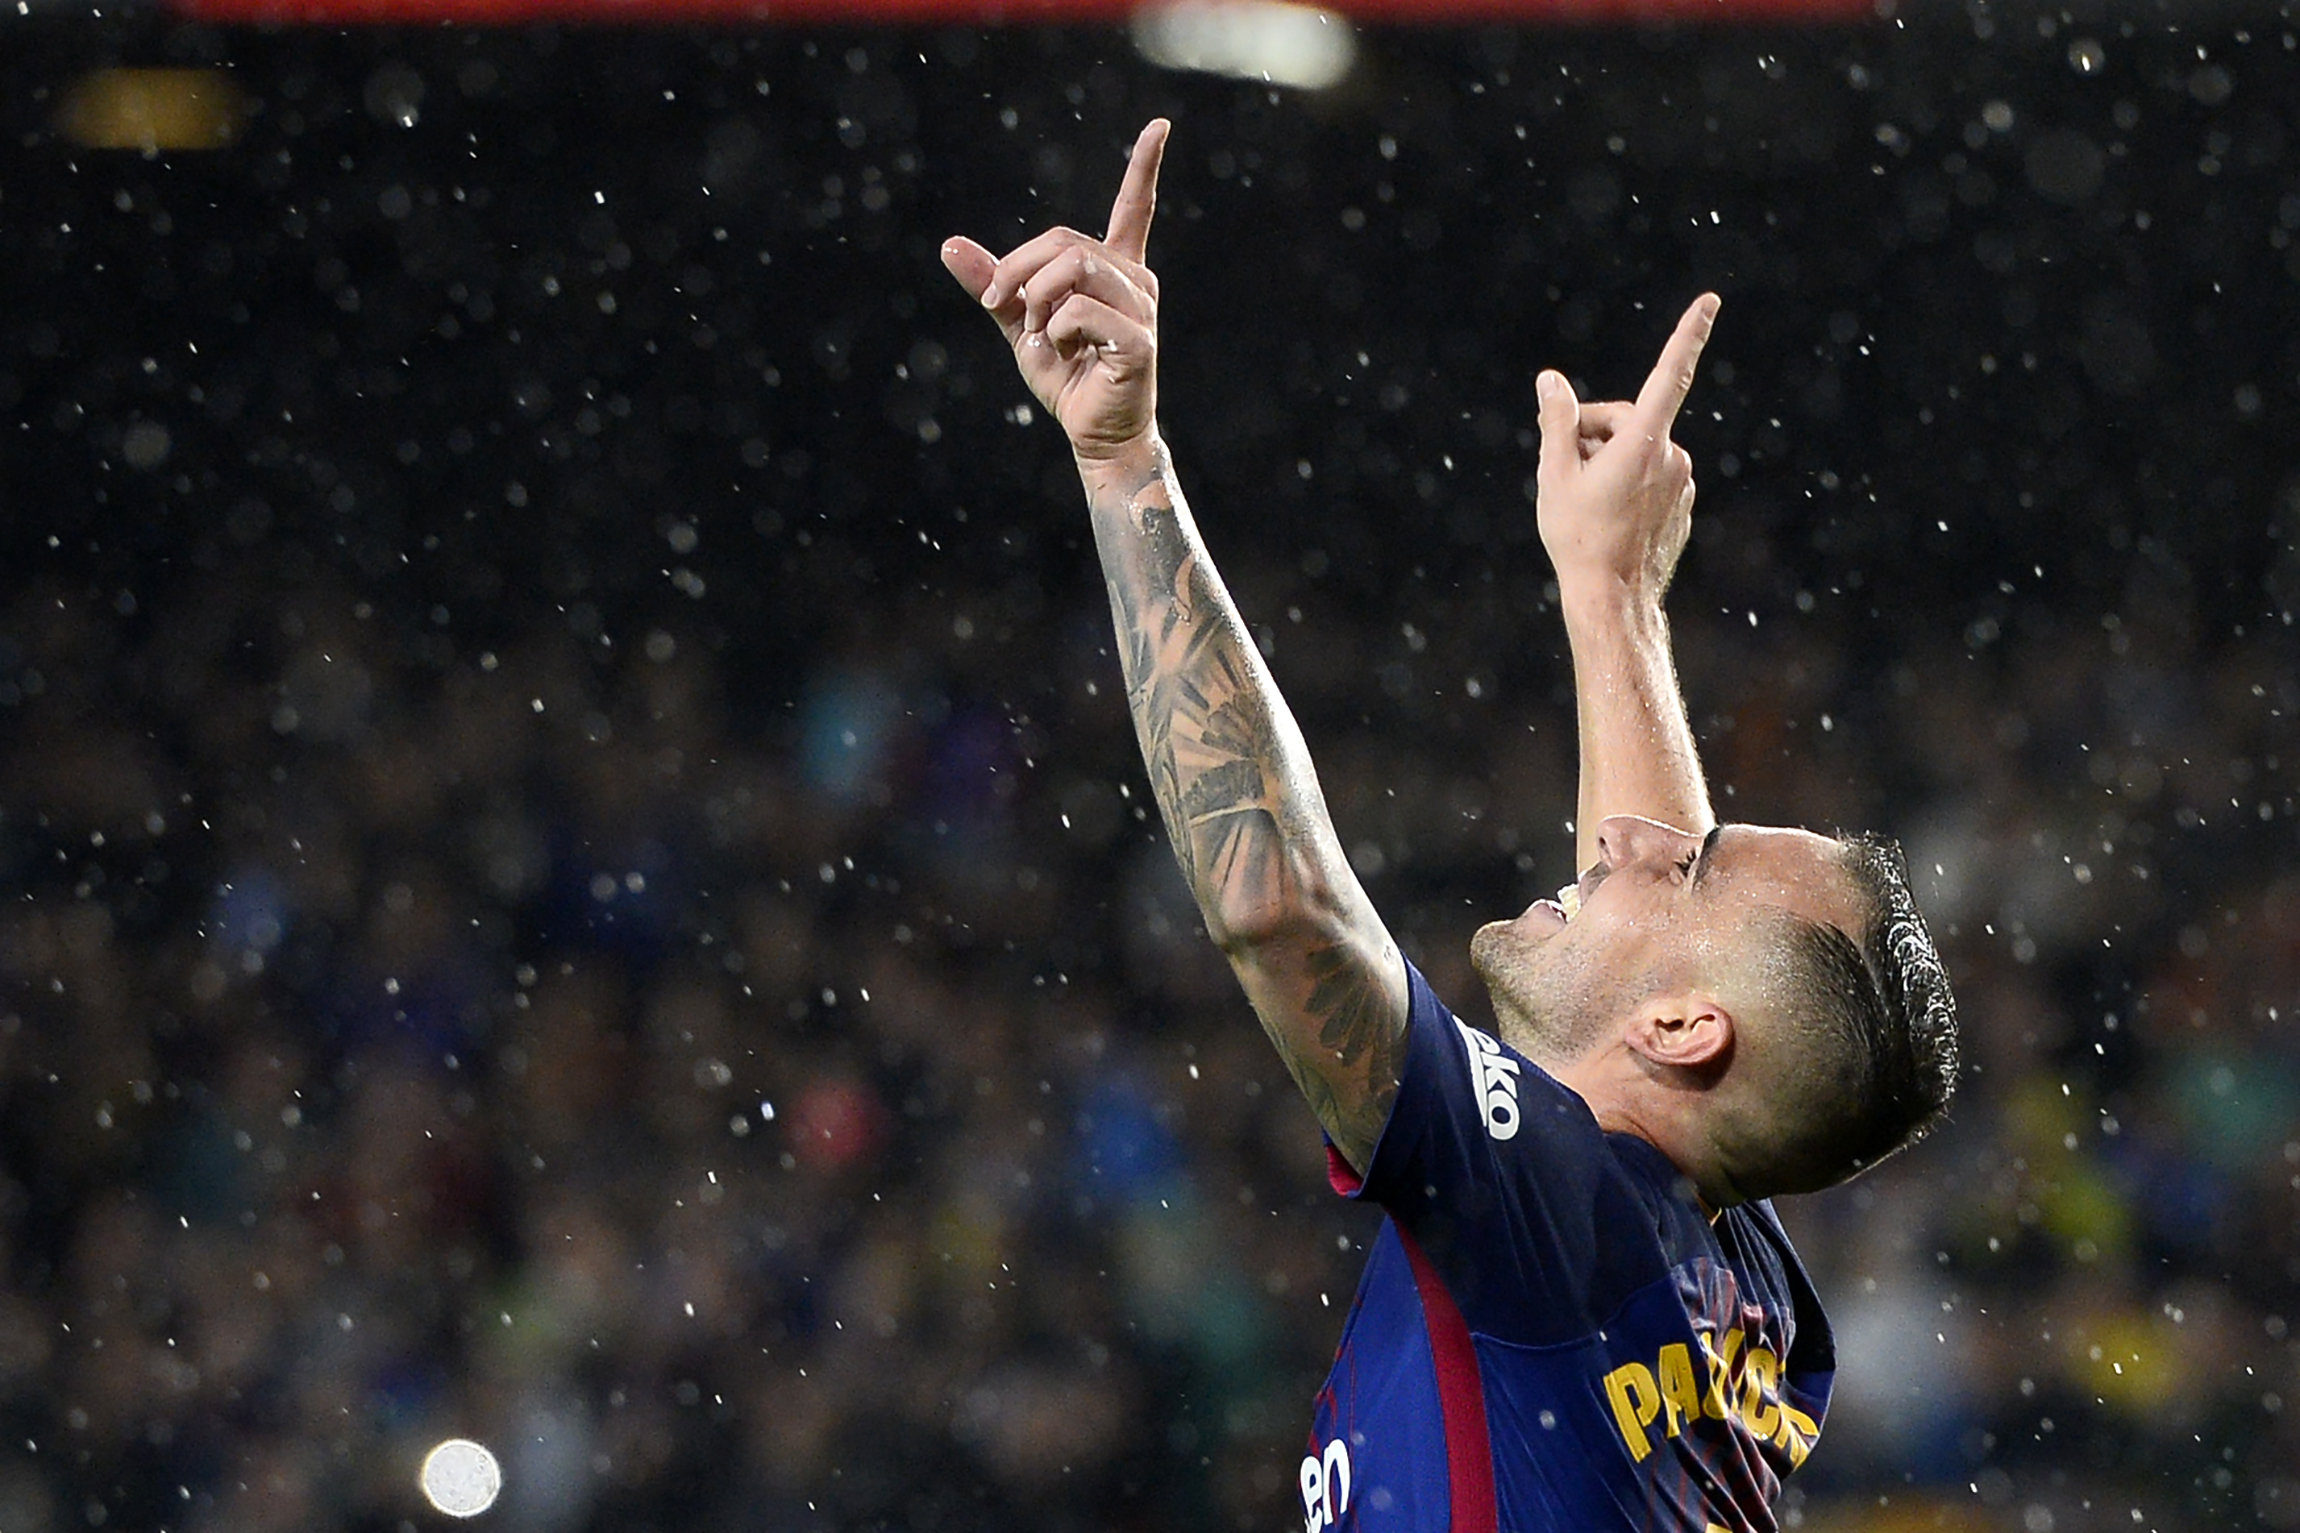 Barcelona's Spanish forward Paco Alcacer celebrates after scoring a goal during the Spanish league football match FC Barcelona vs Sevilla FC at the Camp Nou stadium in Barcelona on November 4, 2017. / AFP PHOTO / Josep LAGO        (Photo credit should read JOSEP LAGO/AFP/Getty Images)